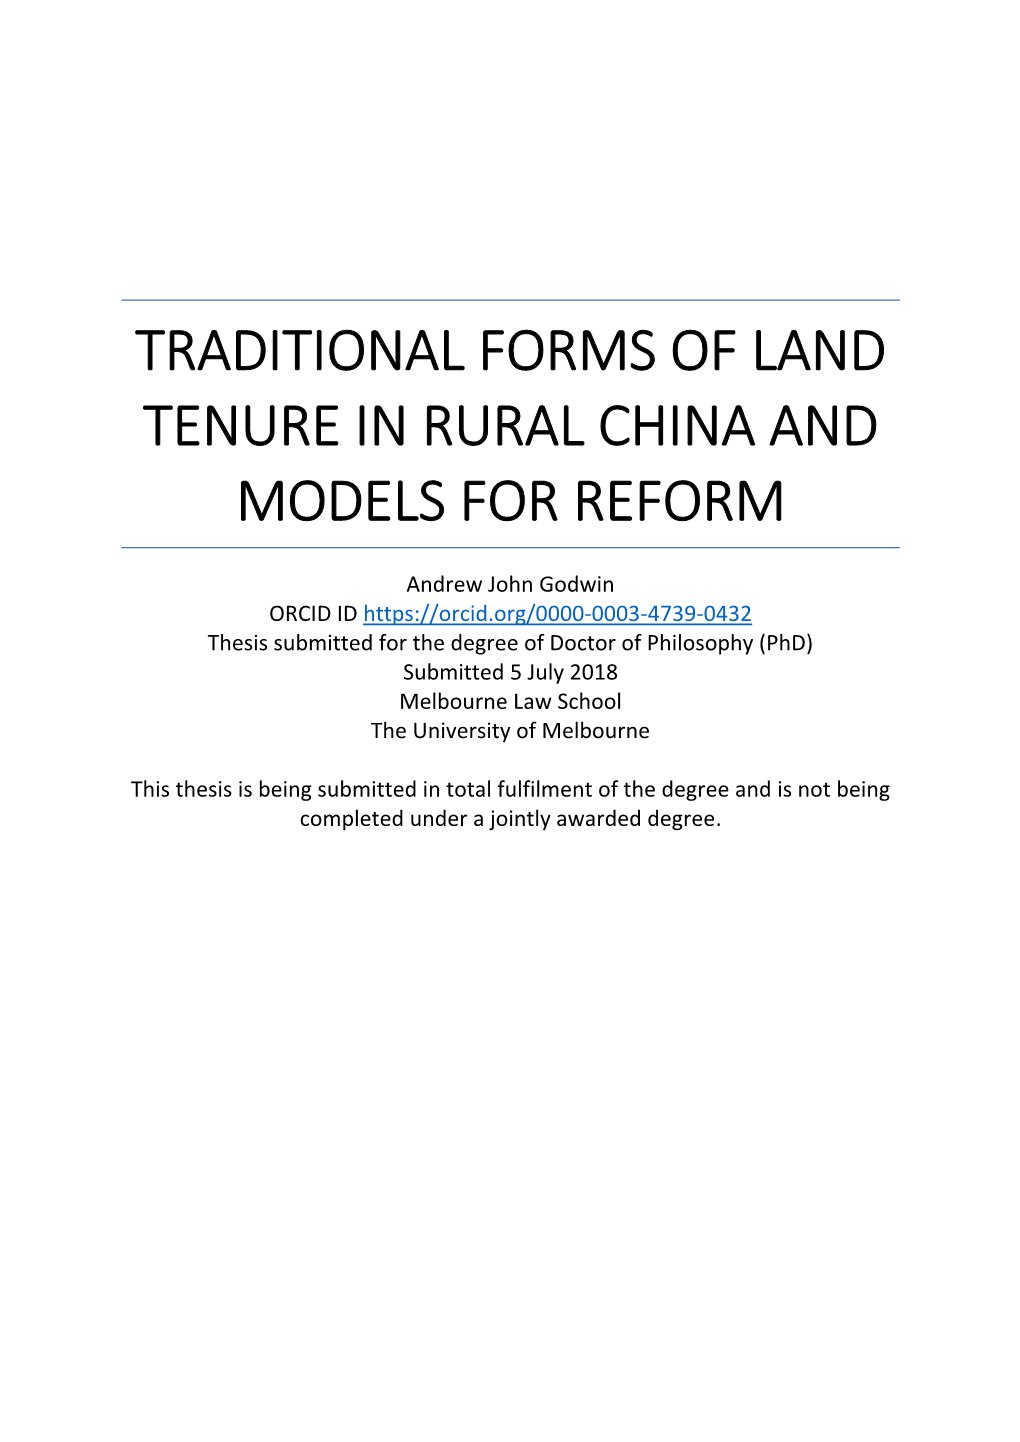 Traditional Forms of Land Tenure in Rural China and Models for Reform